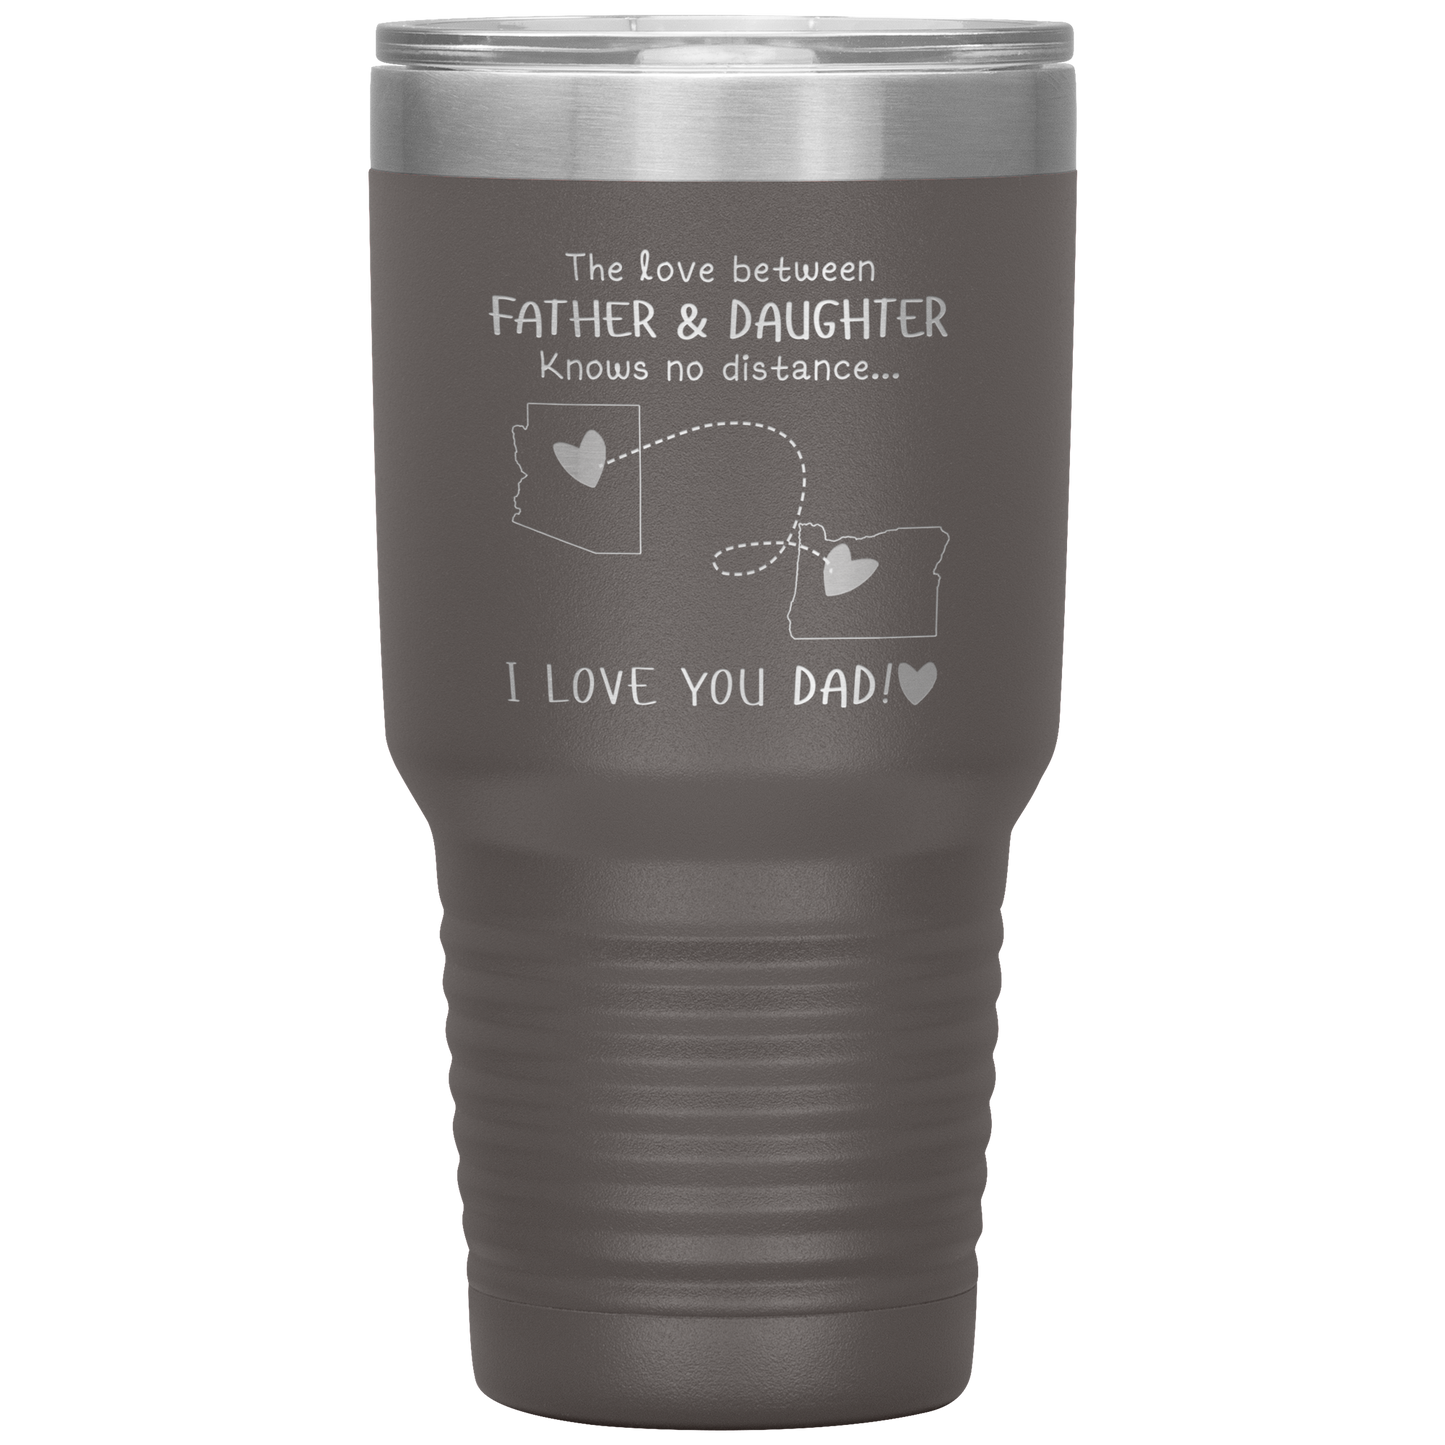 HNV-CUS-GRAND-sp-41874 - [ Arizona | Oregon ] (Tumbler_30oz) Mother Day Gifts Personalized Mothers Day Gifts Coffee Mug